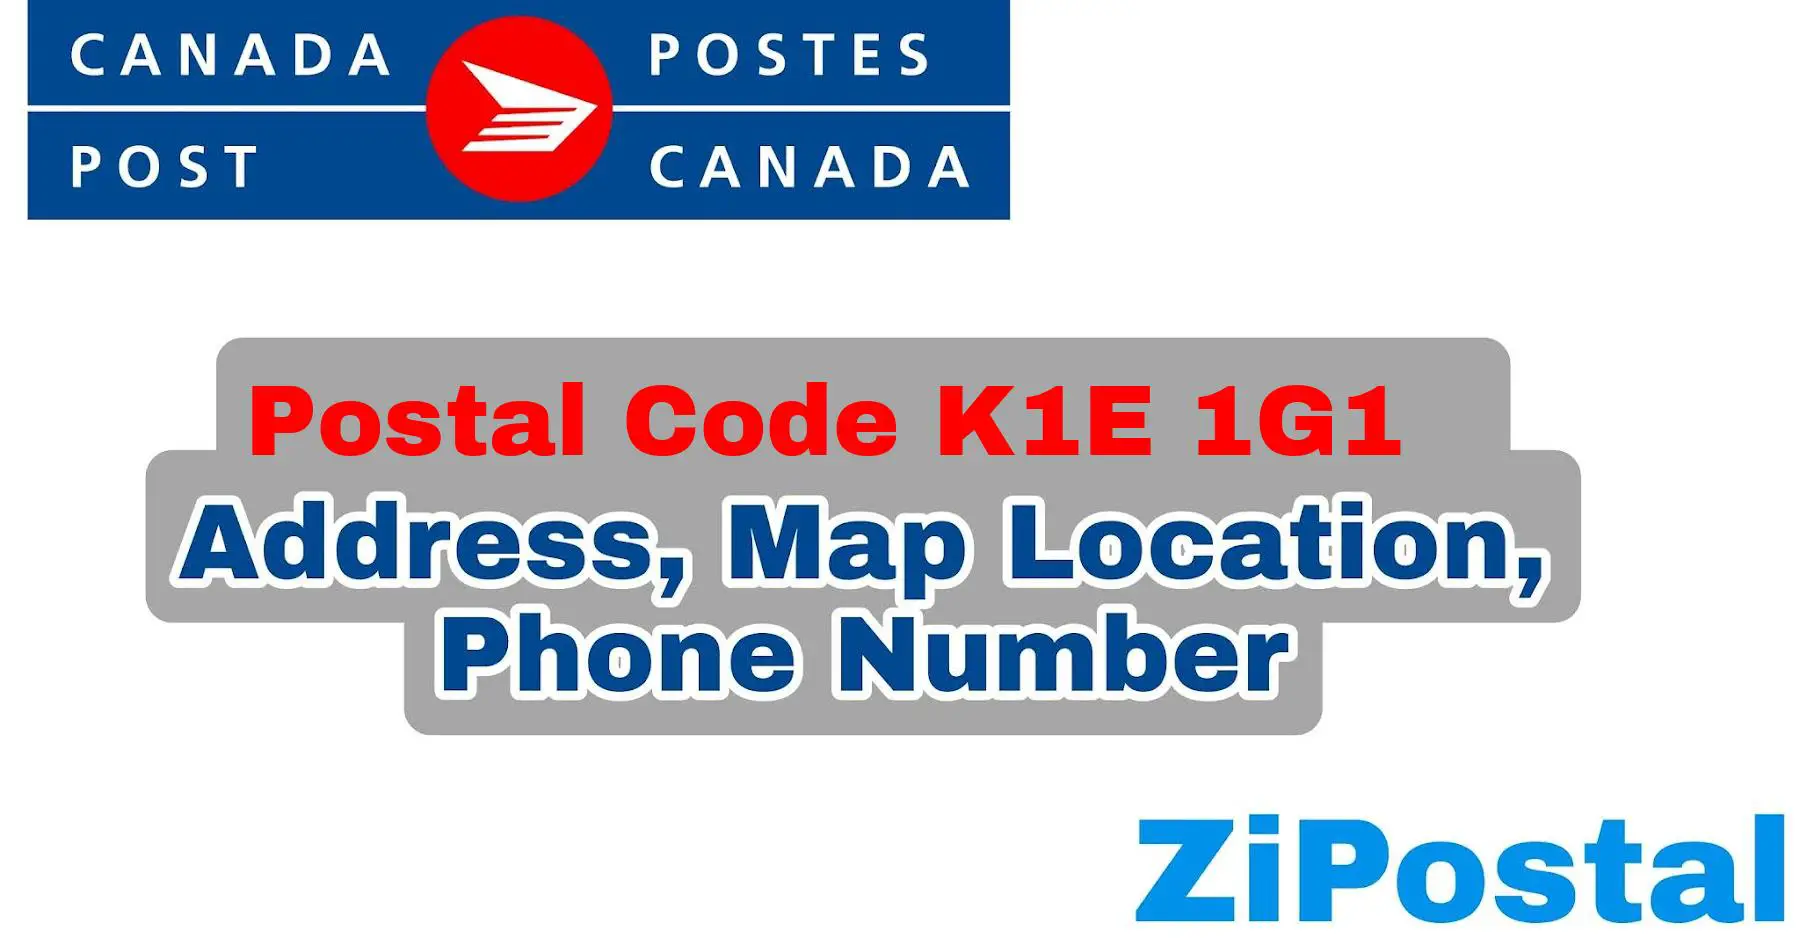 Postal Code K1E 1G1 Address Map Location and Phone Number